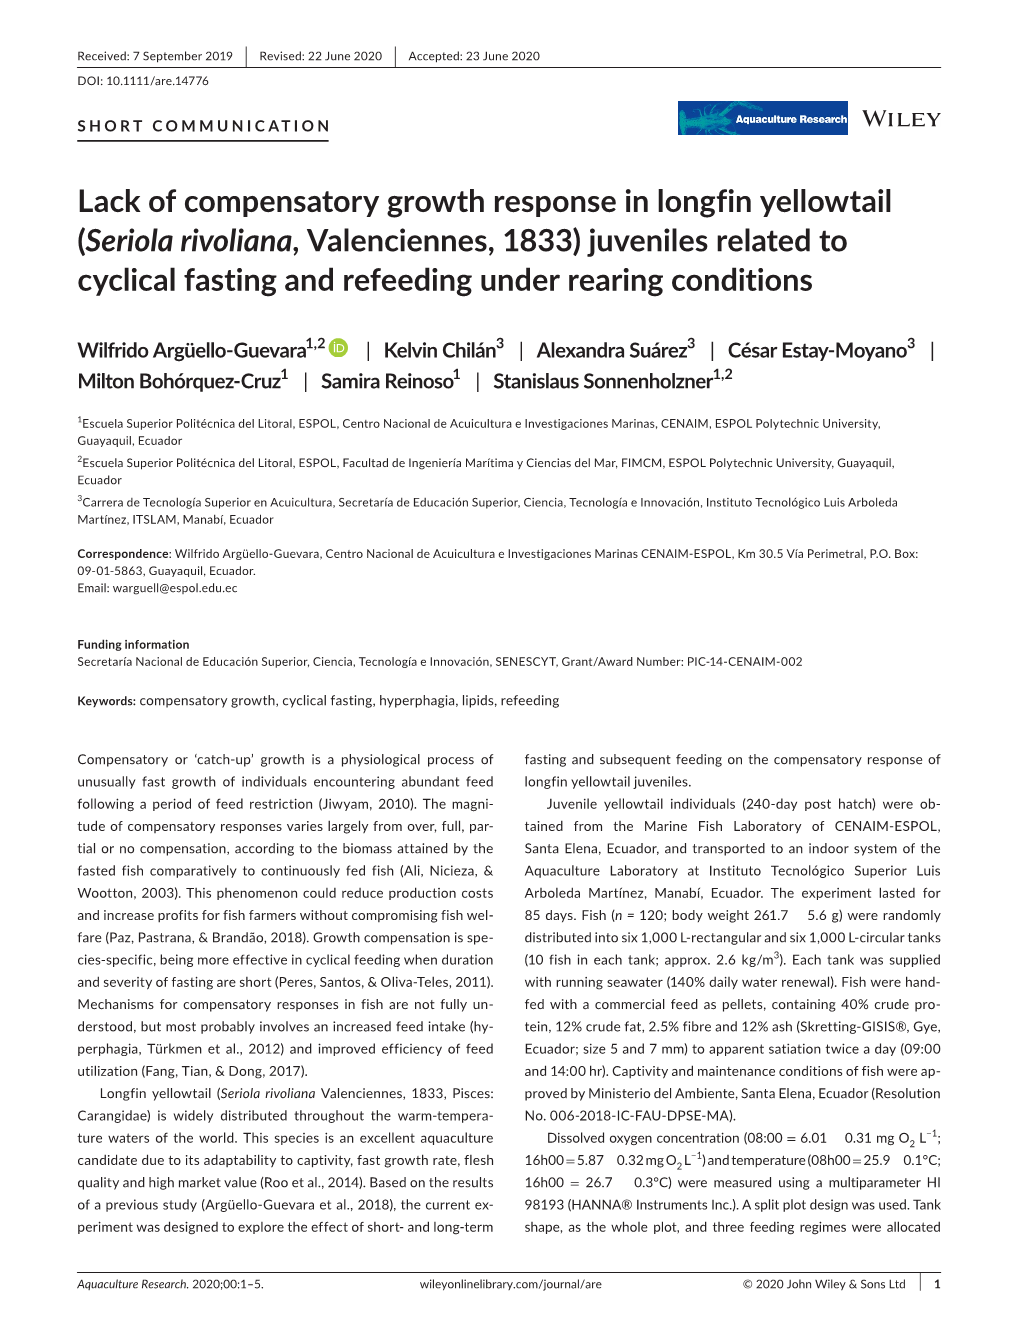 Lack of Compensatory Growth Response in Longfin Yellowtail (Seriola Rivoliana, Valenciennes, 1833) Juveniles Related to Cyclical